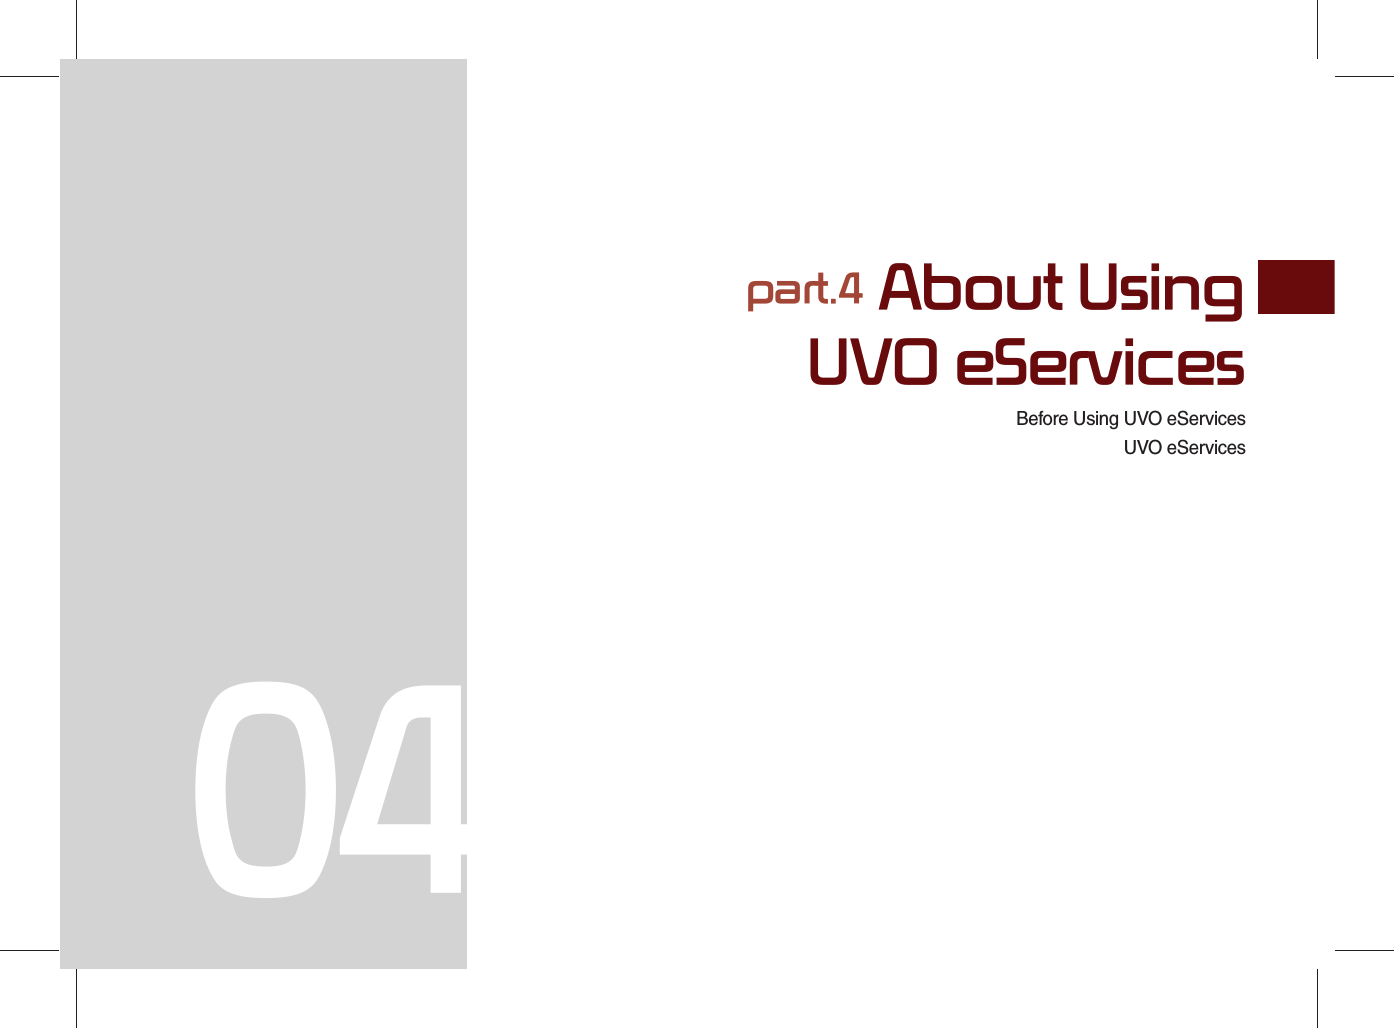 Before Using UVO eServicesUVO eServicespart.4 About Using UVO eServices04